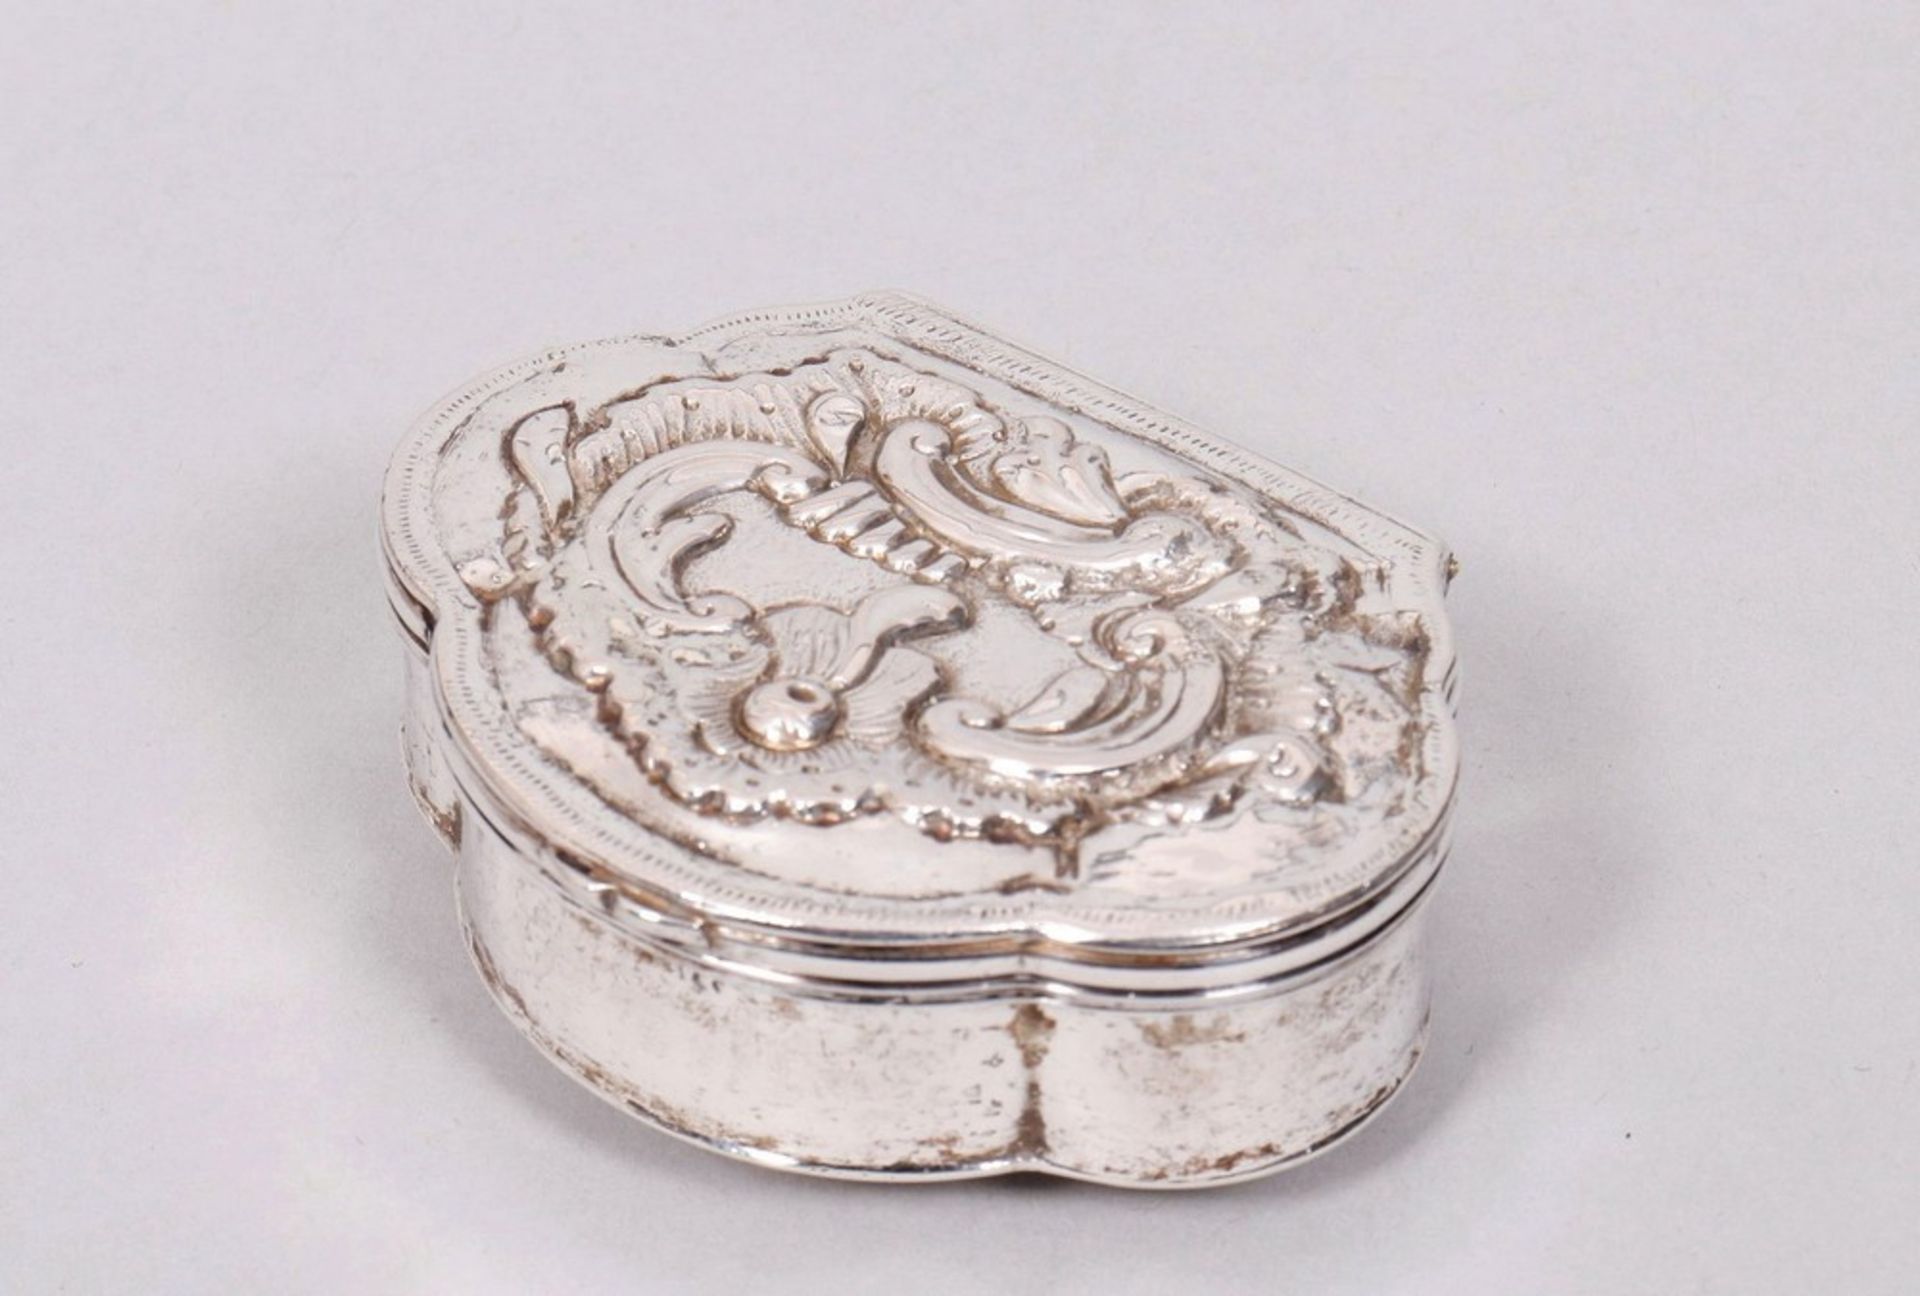 Baroque snuff box, silver, Christian Hecht (1733-1794), Jever, 2nd half 18th C.